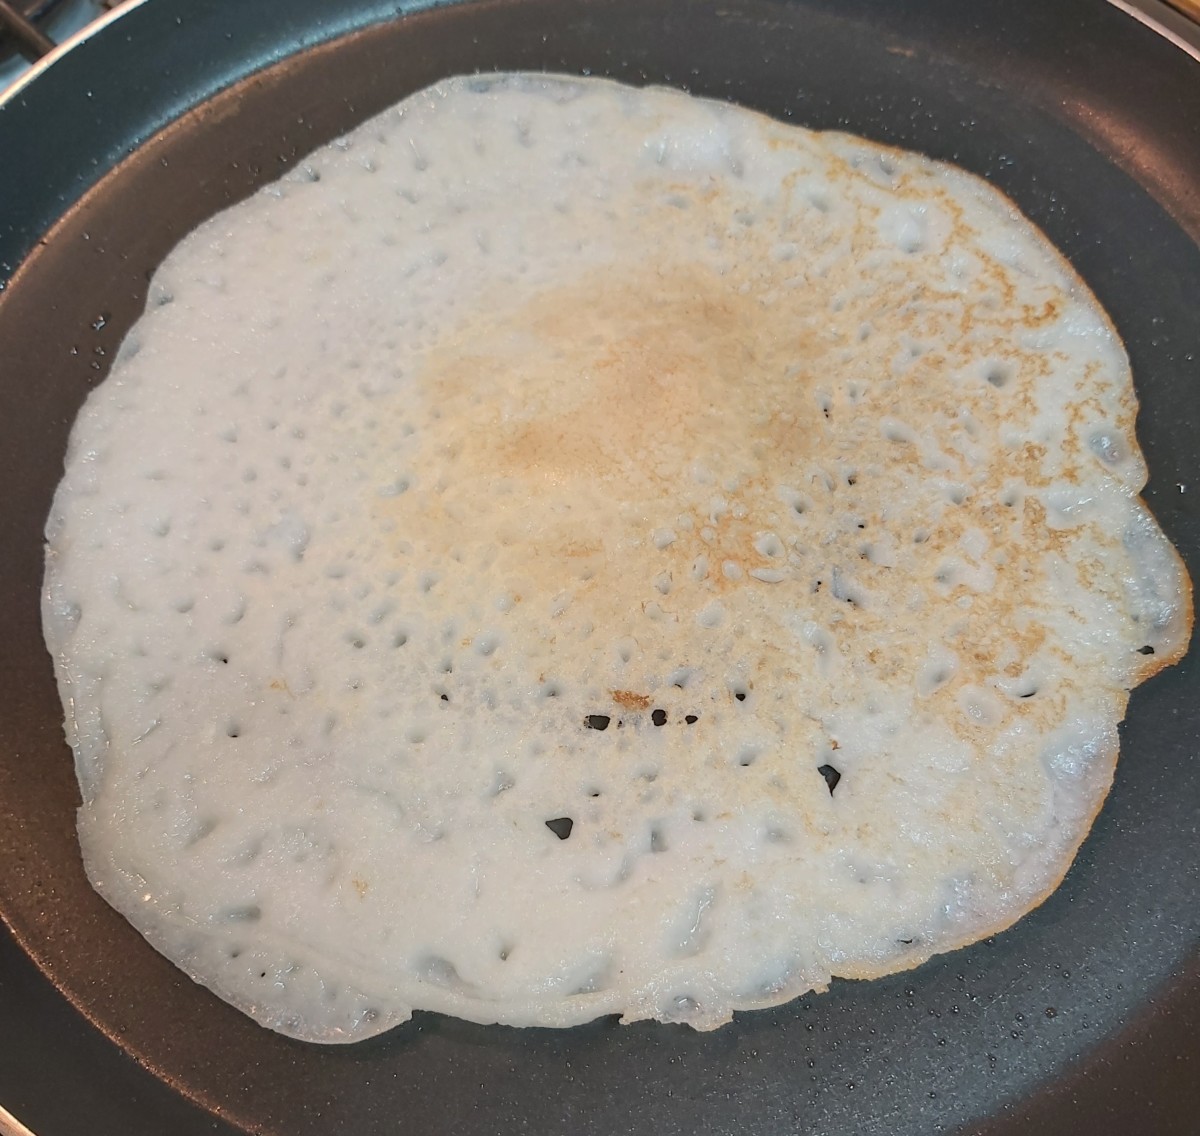 Cover and cook on medium flame. Once cooked completely, flip the dosa to cook the side. (You can see how it is a light golden brown). Repeat the process with the remaining batter. 